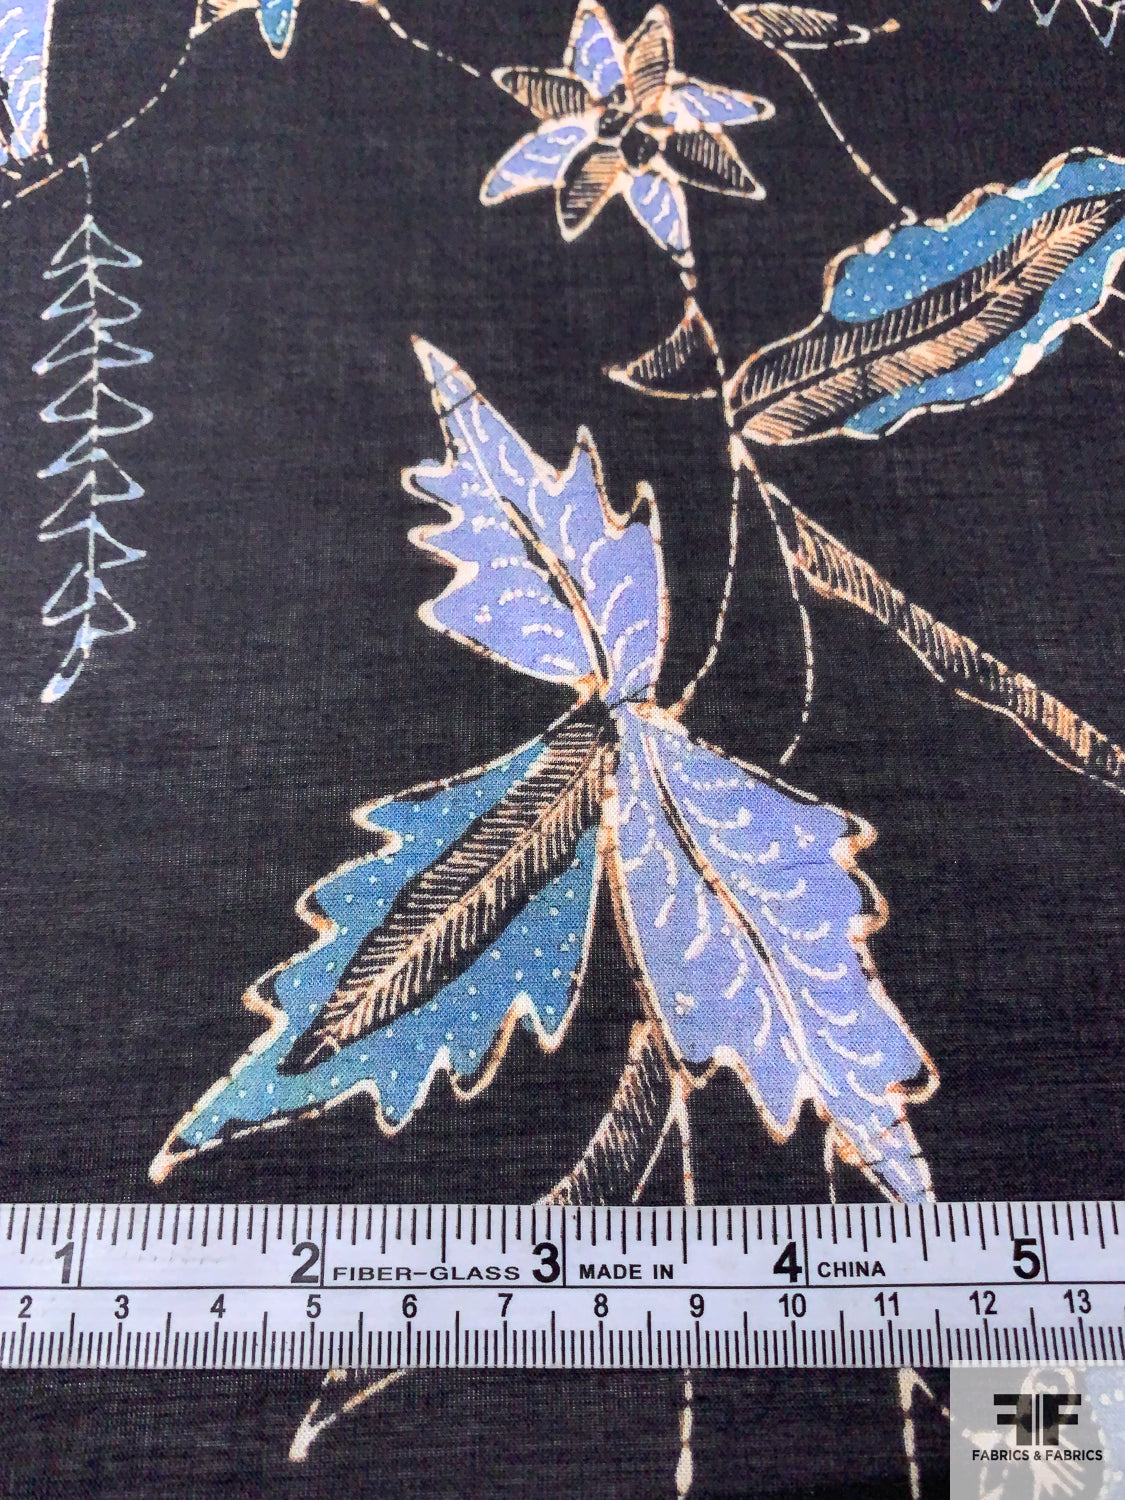 Leaf and Floral Sketch Printed Cotton Voile - Black / Periwinkle / Nude / Navy